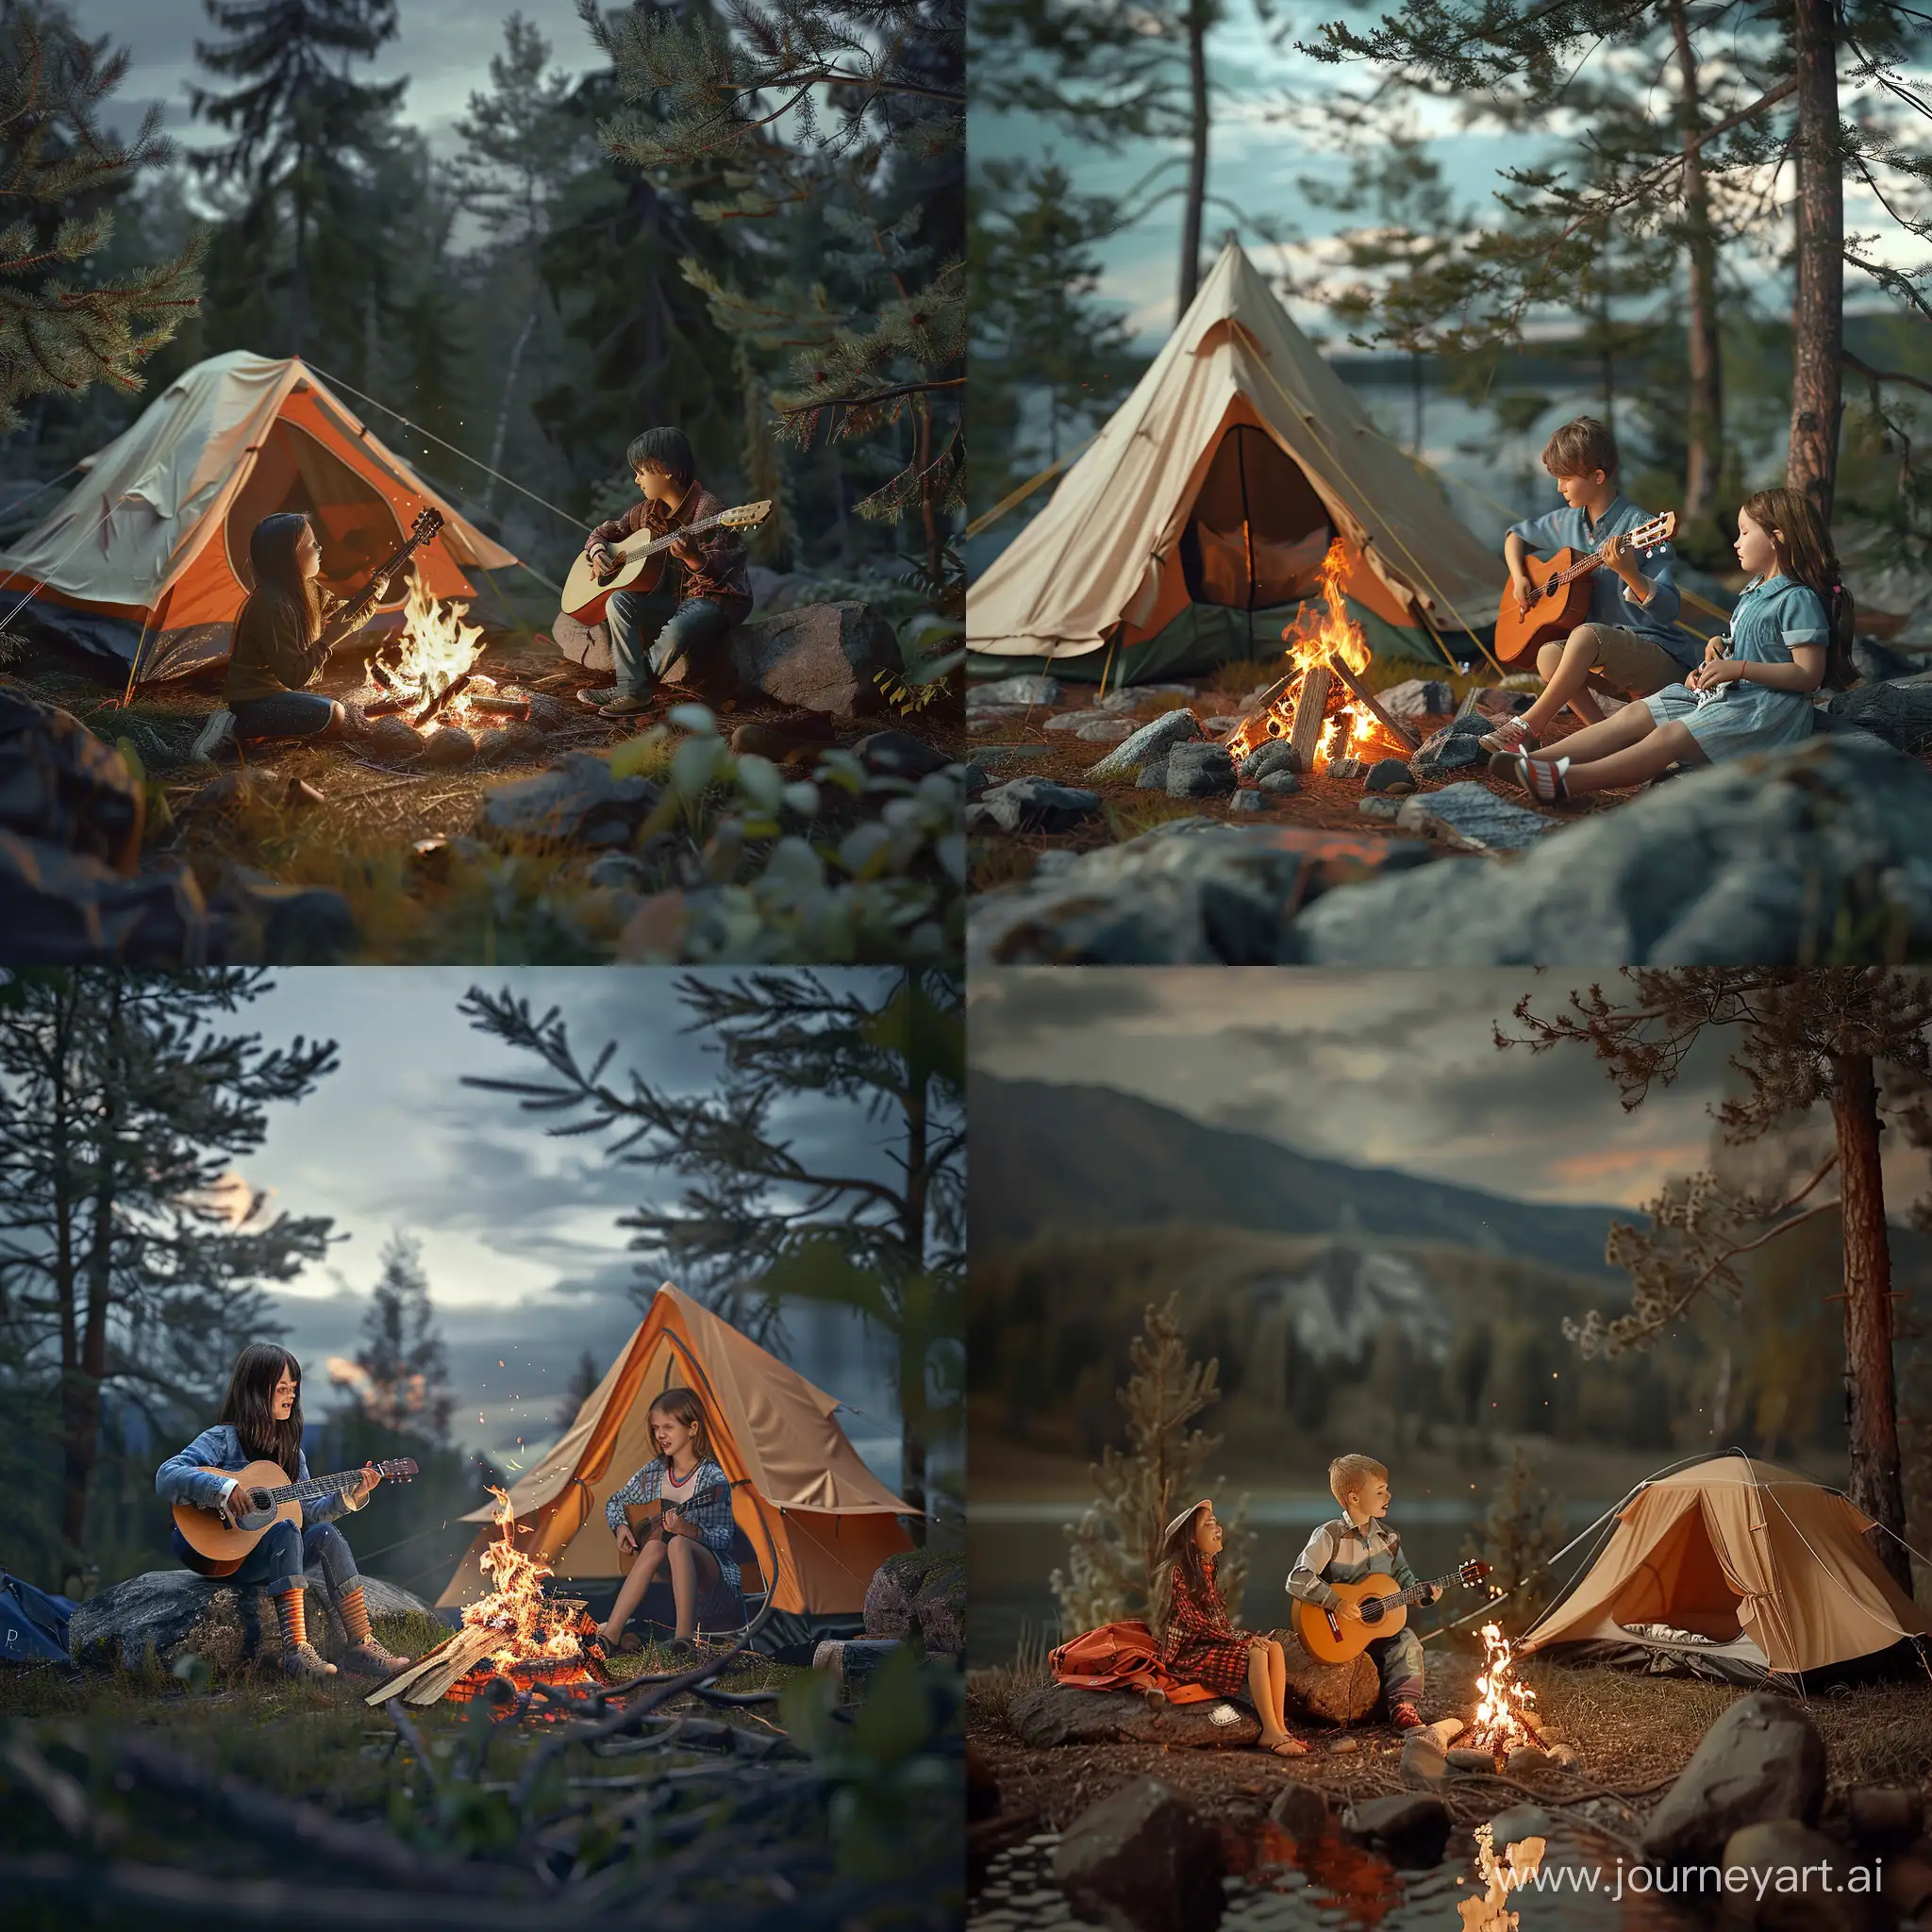 Romantic-Campfire-Serenade-Boy-and-Girl-Singing-by-Tourist-Tent